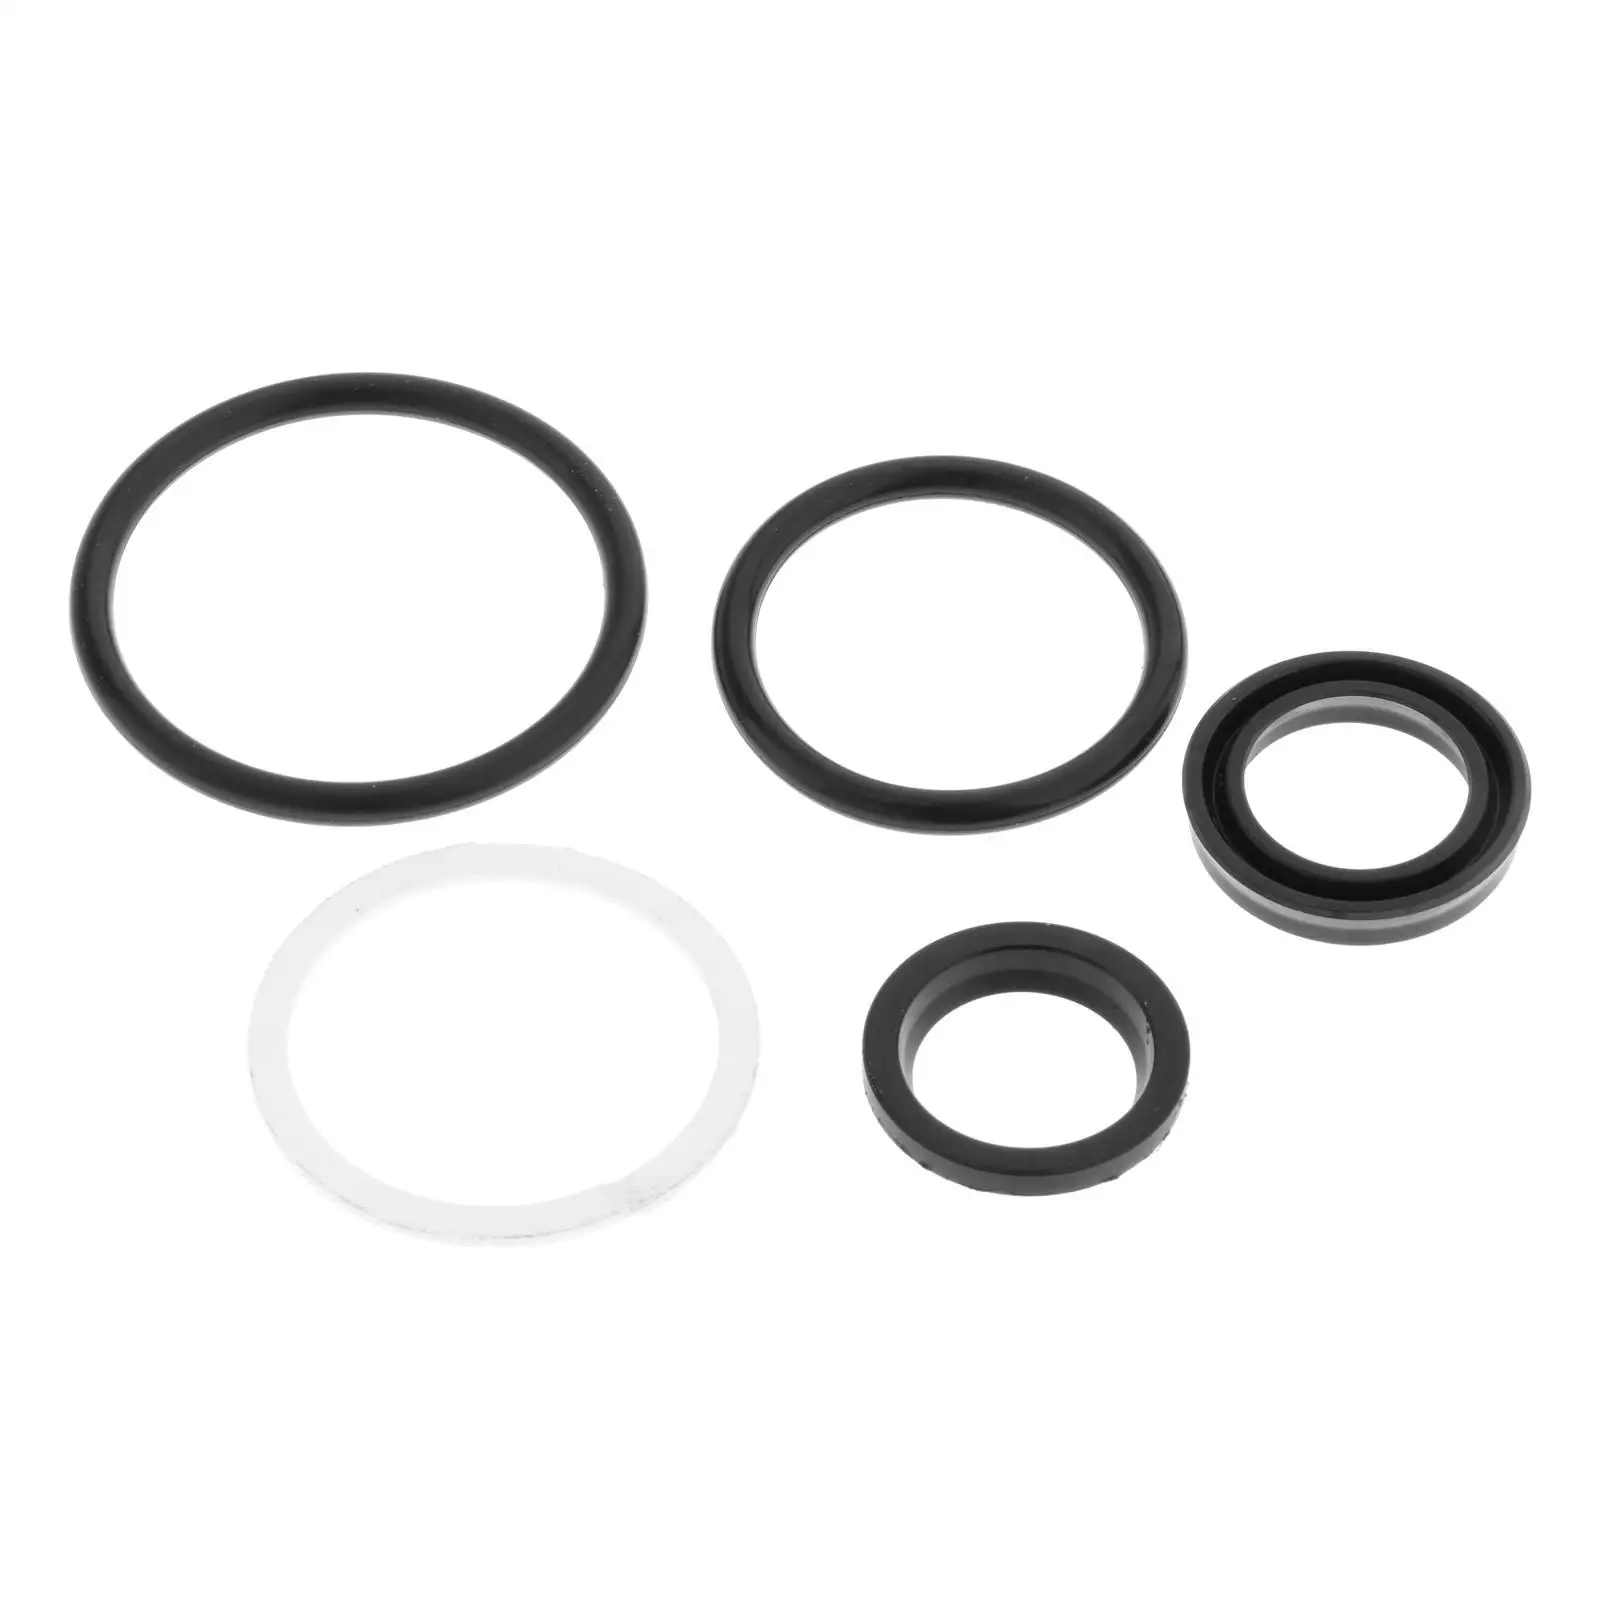 Trim Cylinder Repair Kit O-Ring 6G5-43864-00 for Yamaha Outboard Parts